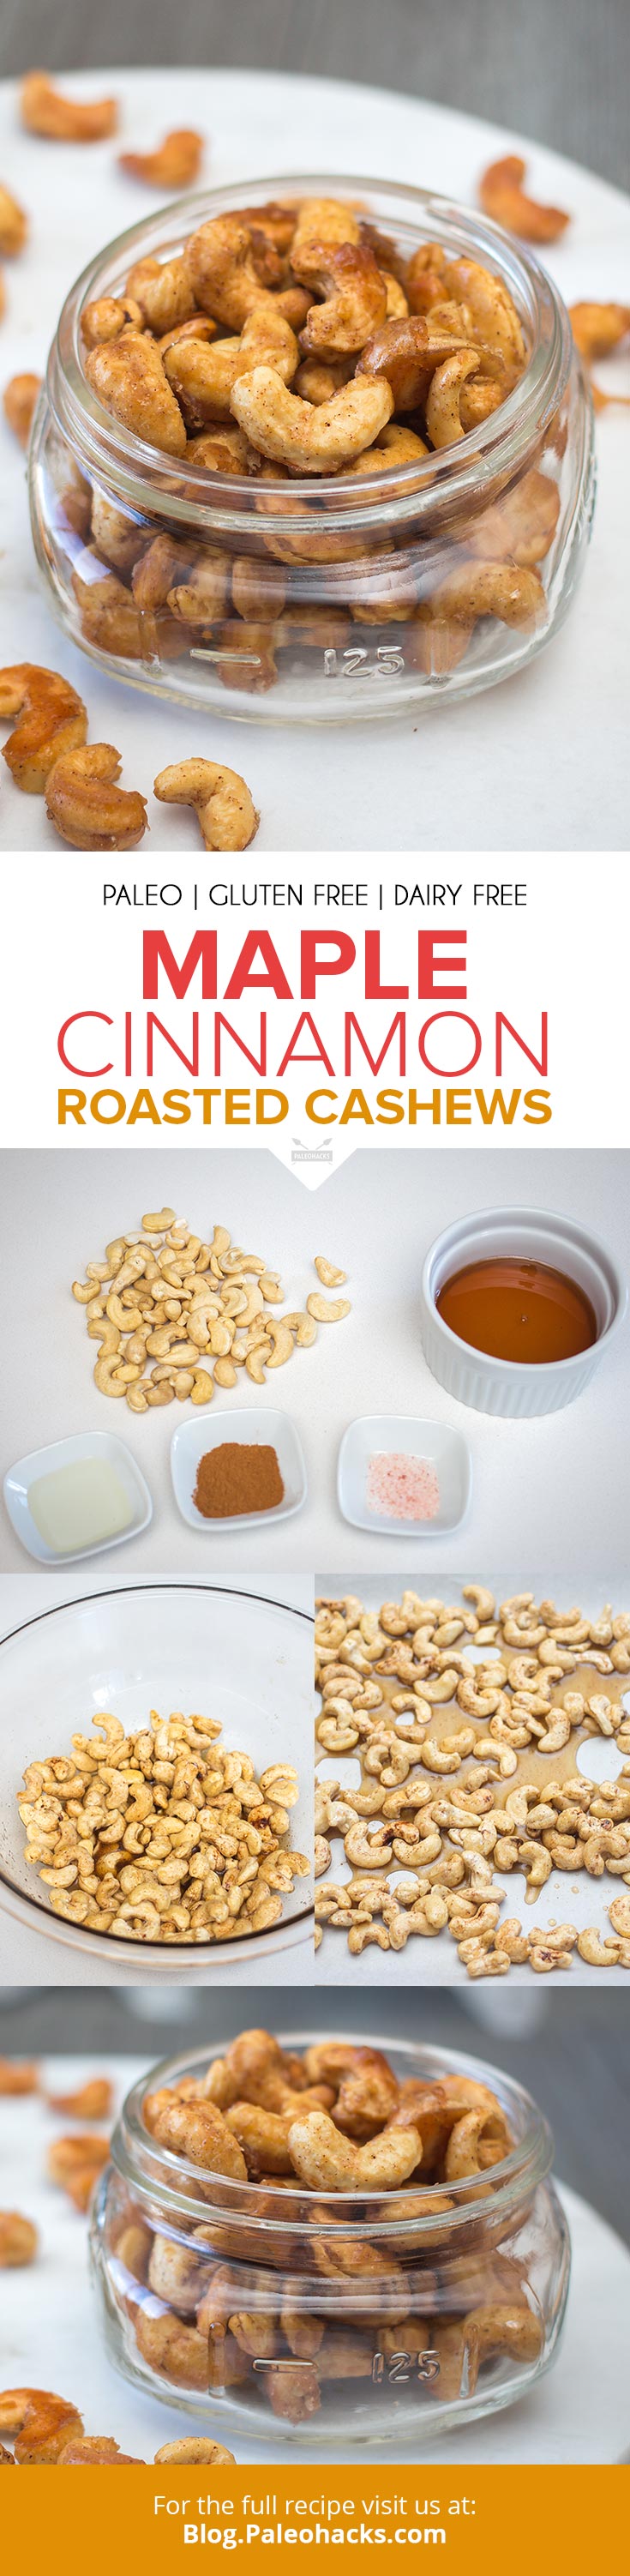 Calm your rumbling tummy with a batch of sweet and salty cashews roasted in a maple cinnamon glaze.